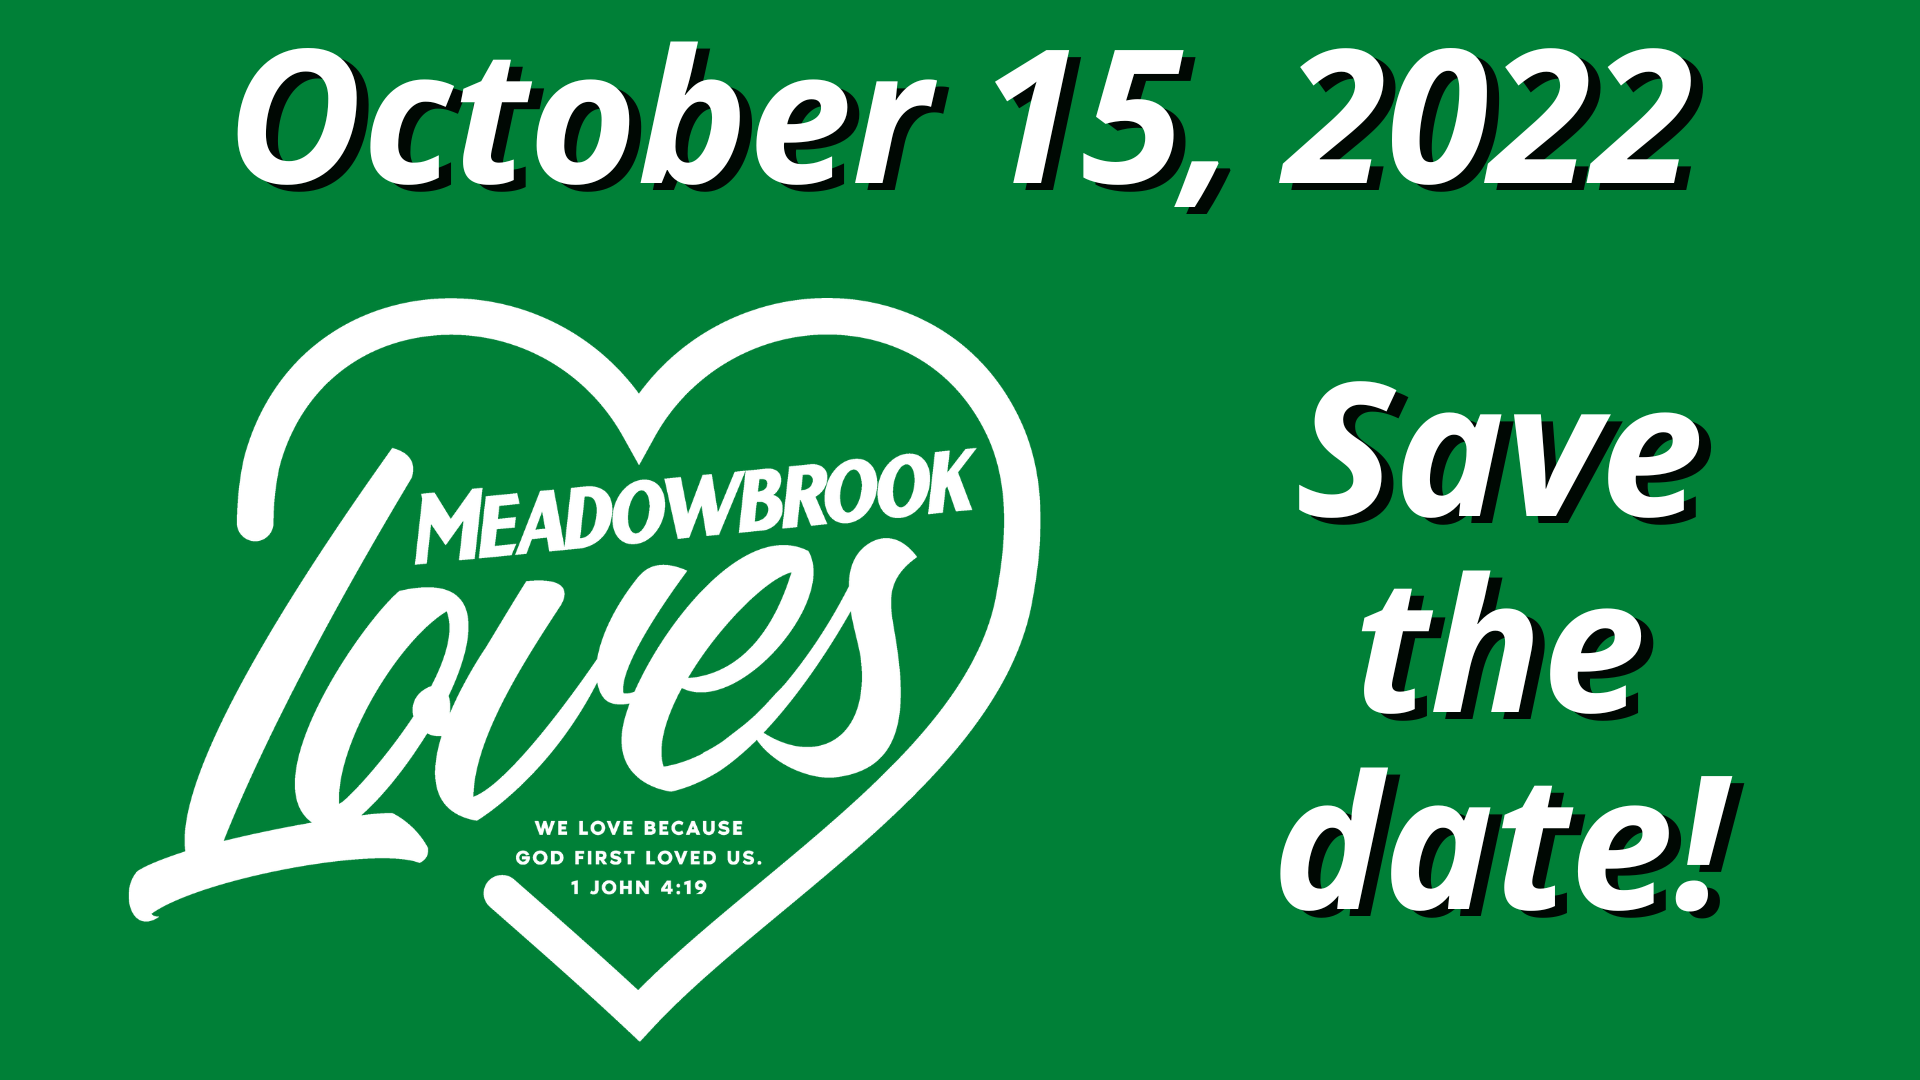 Meadowbrook LOVES GREEN Save the Date Oct 15, 2022 (1920 × 1080 px).png